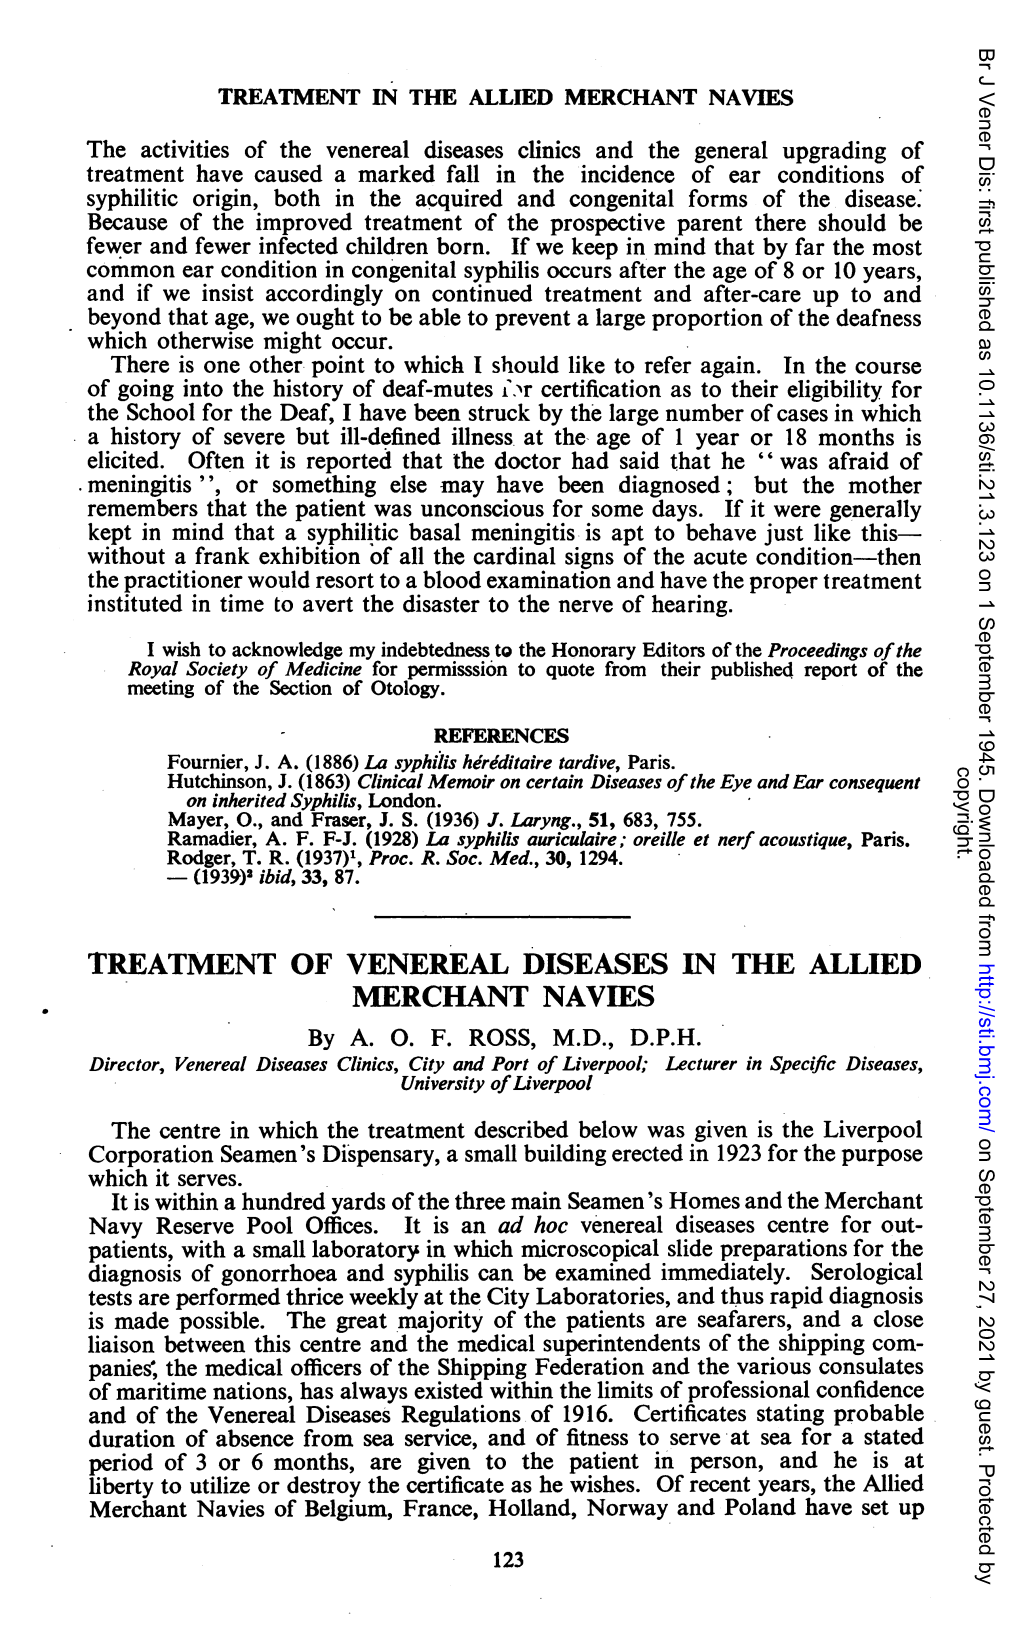 TREATMENT of VENEREAL DISEASES in the ALLIED MERCHANT NAVIES by A